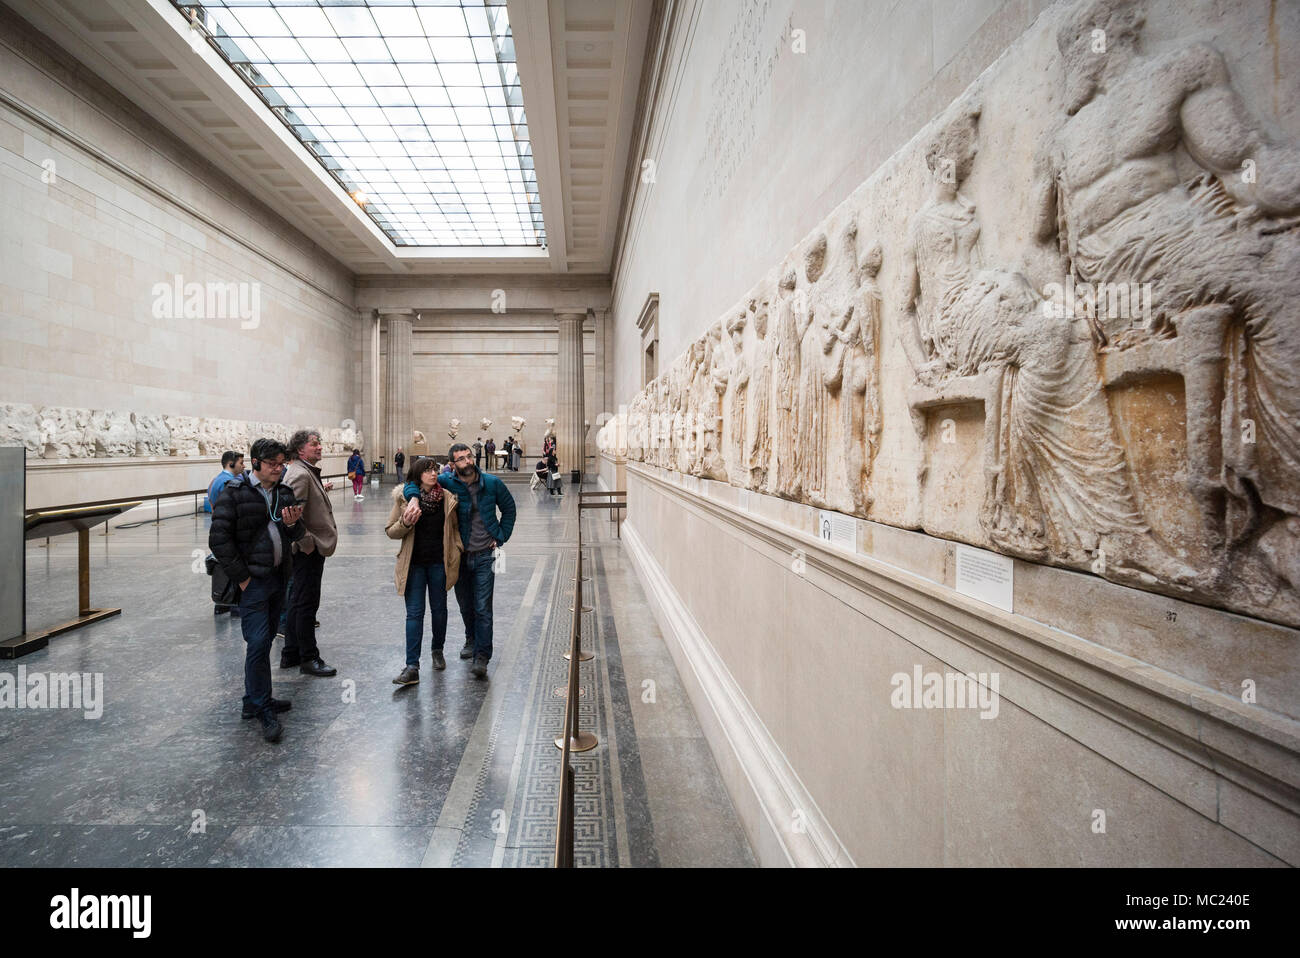 London. England. Visitors to the British Museum looking at the ancient Parthenon Frieze (Elgin Marbles), in the Duveen Gallery, from the Parthenon on  Stock Photo